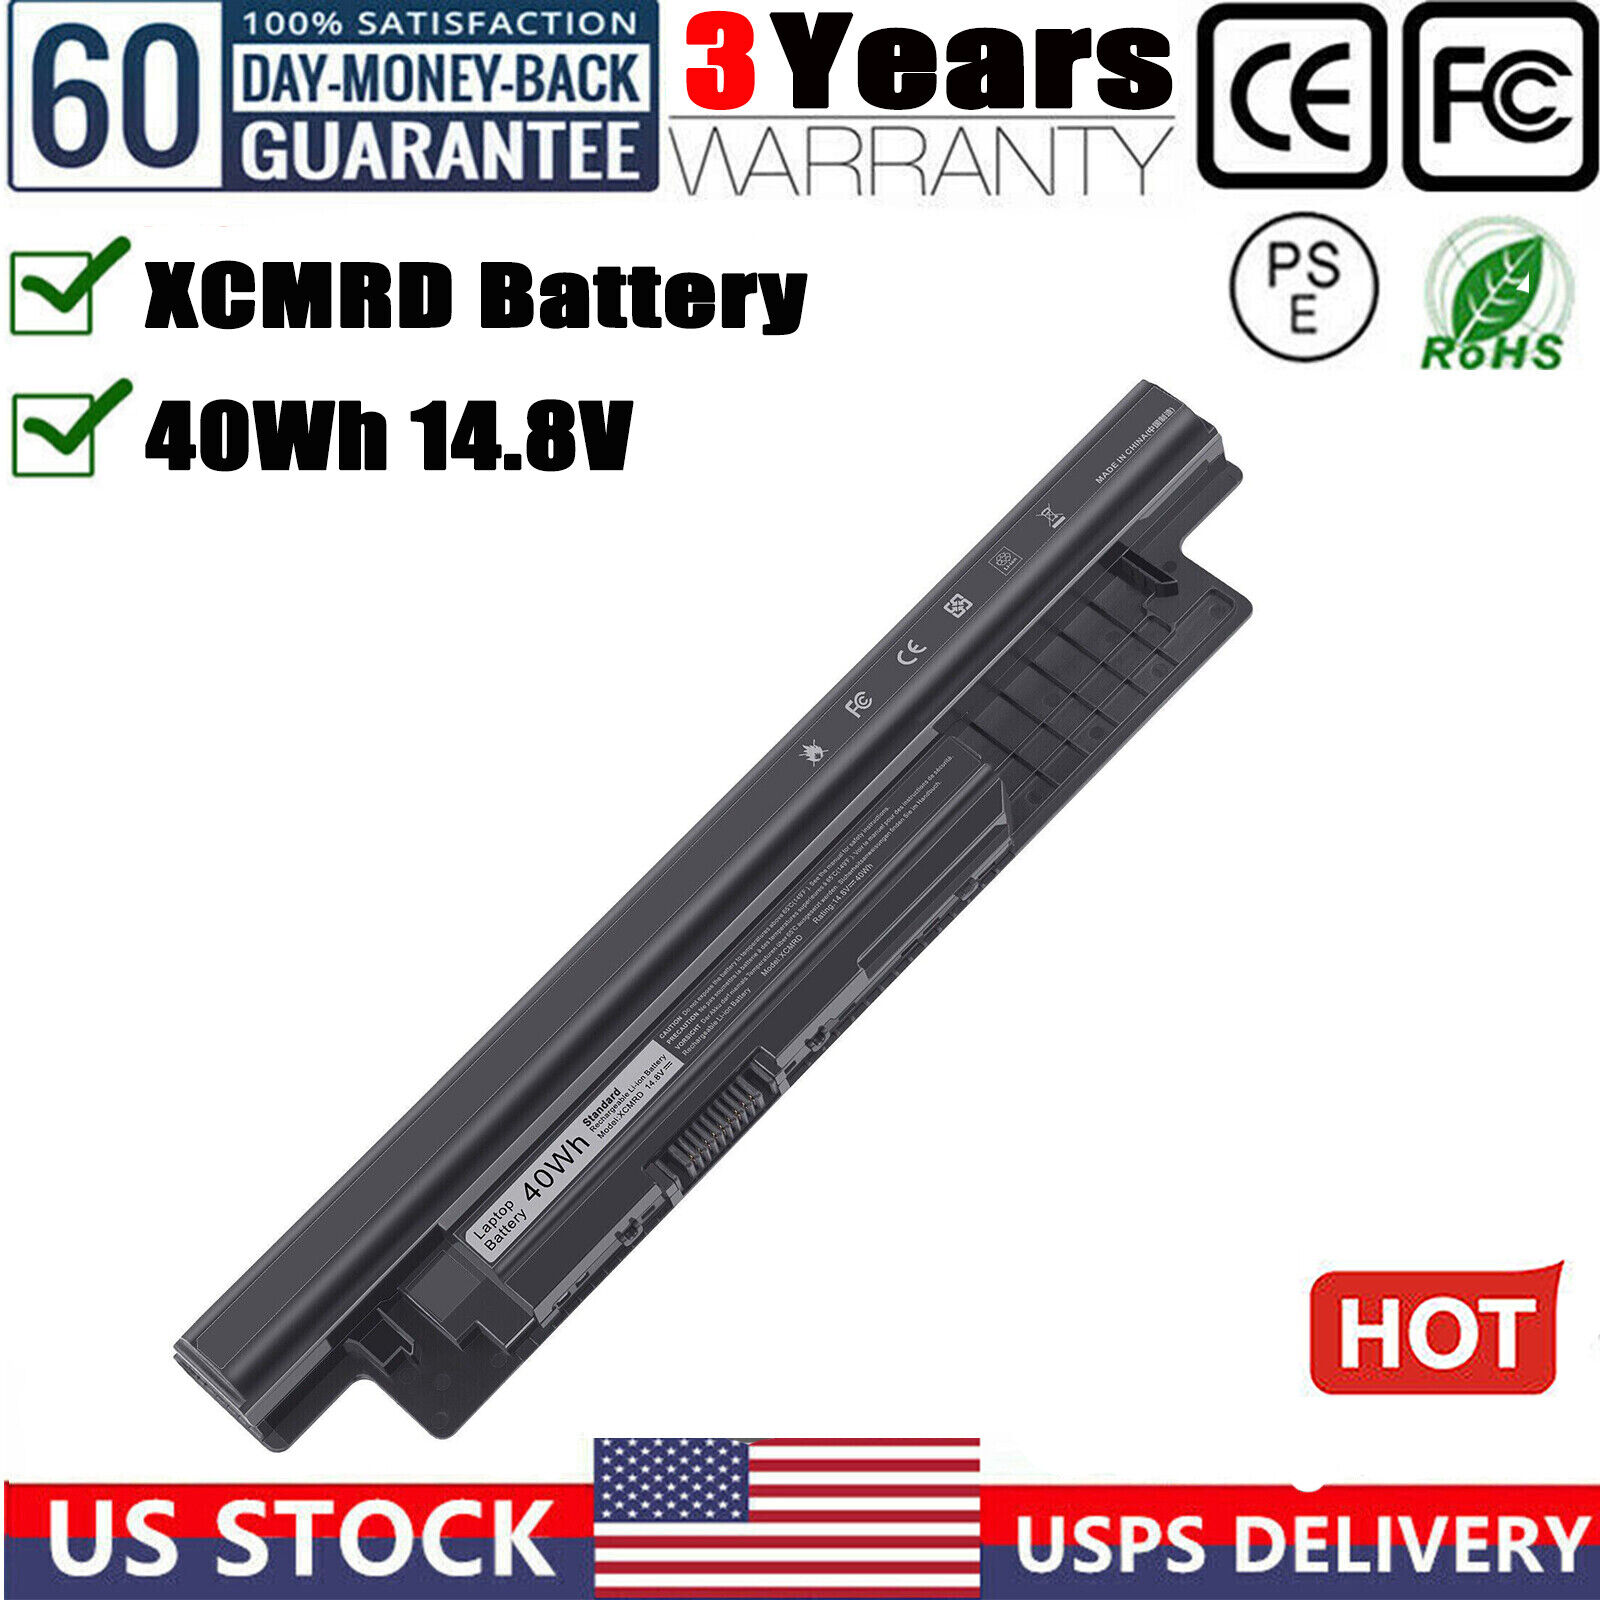 NEW 40WH XCMRD BATTERY FOR DELL INSPIRON 3531 3537 3541 3542 3543 14.8V 4-CELLS